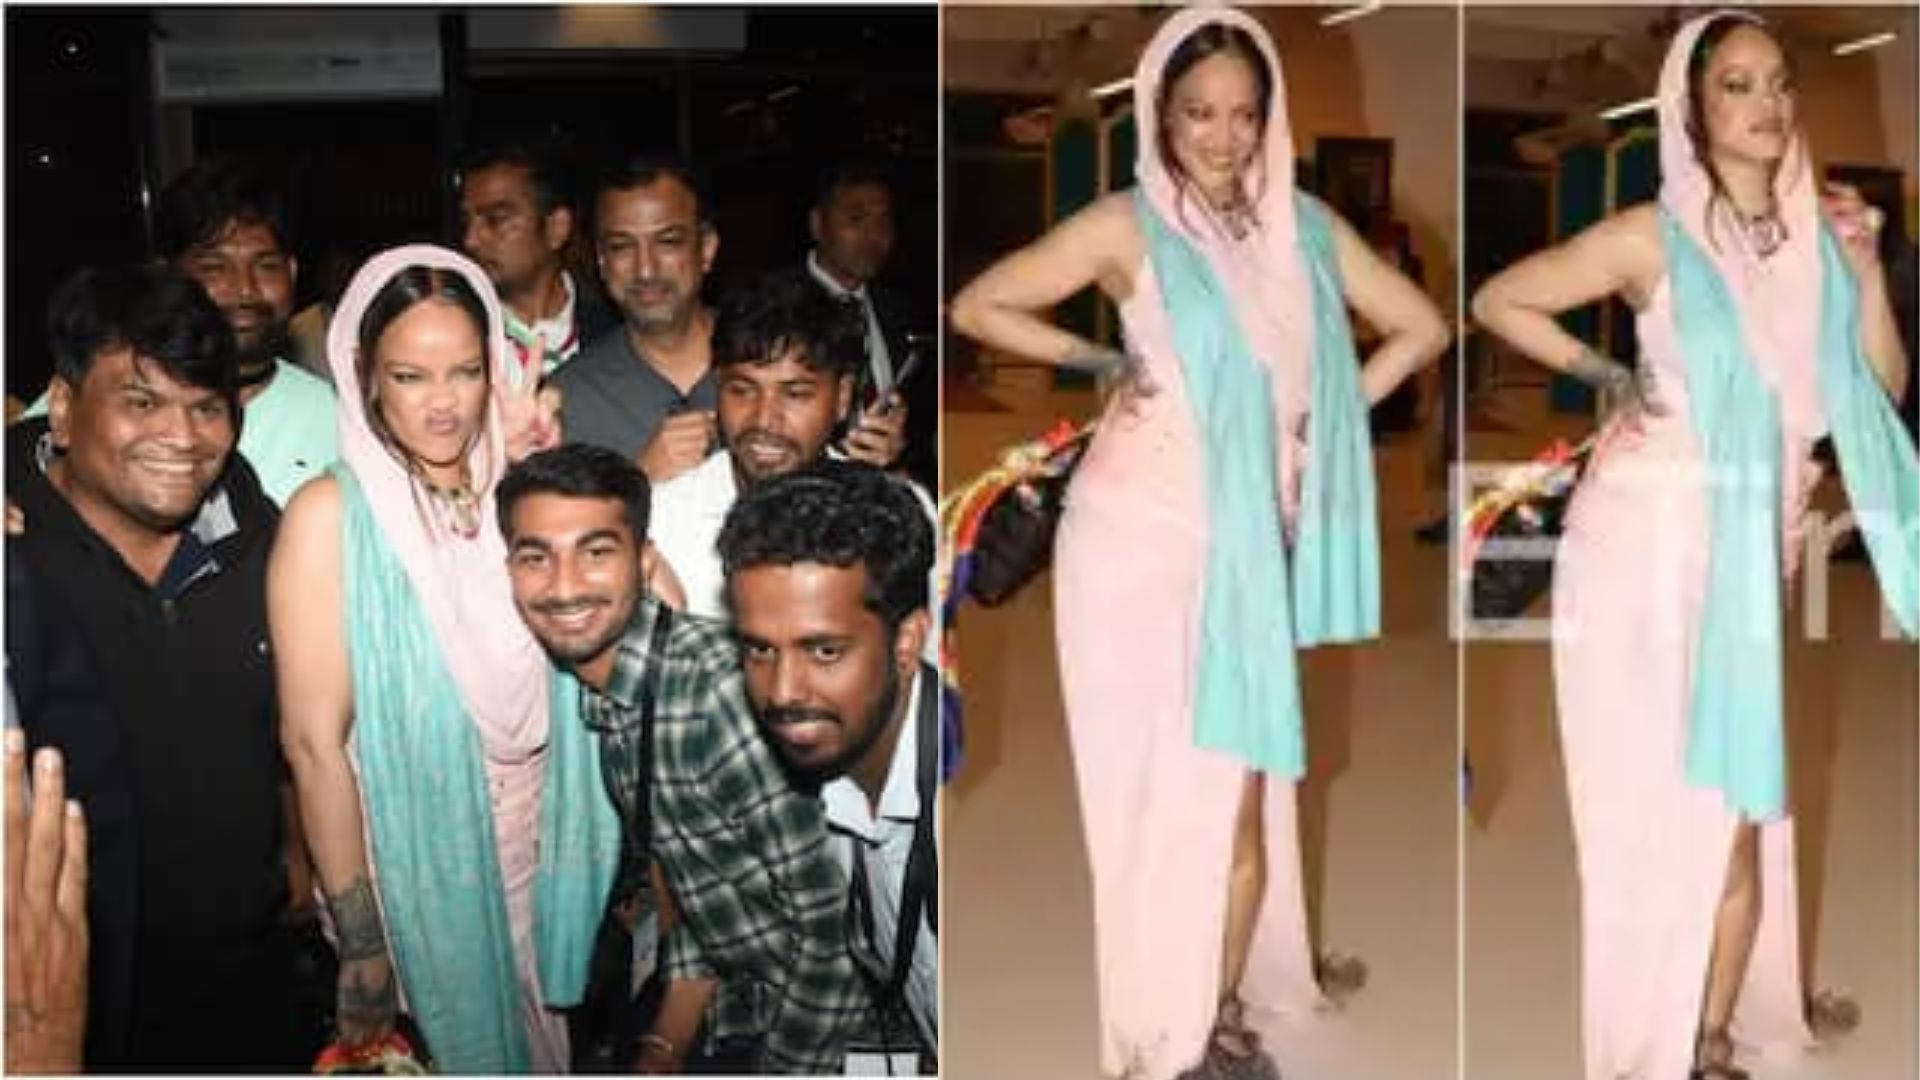 Rihanna Poses With Paparazzi At Airport After Performance At Anant Ambani And Radhika Merchant’s Pre-Wedding festivities, Says ‘I wanna come back’